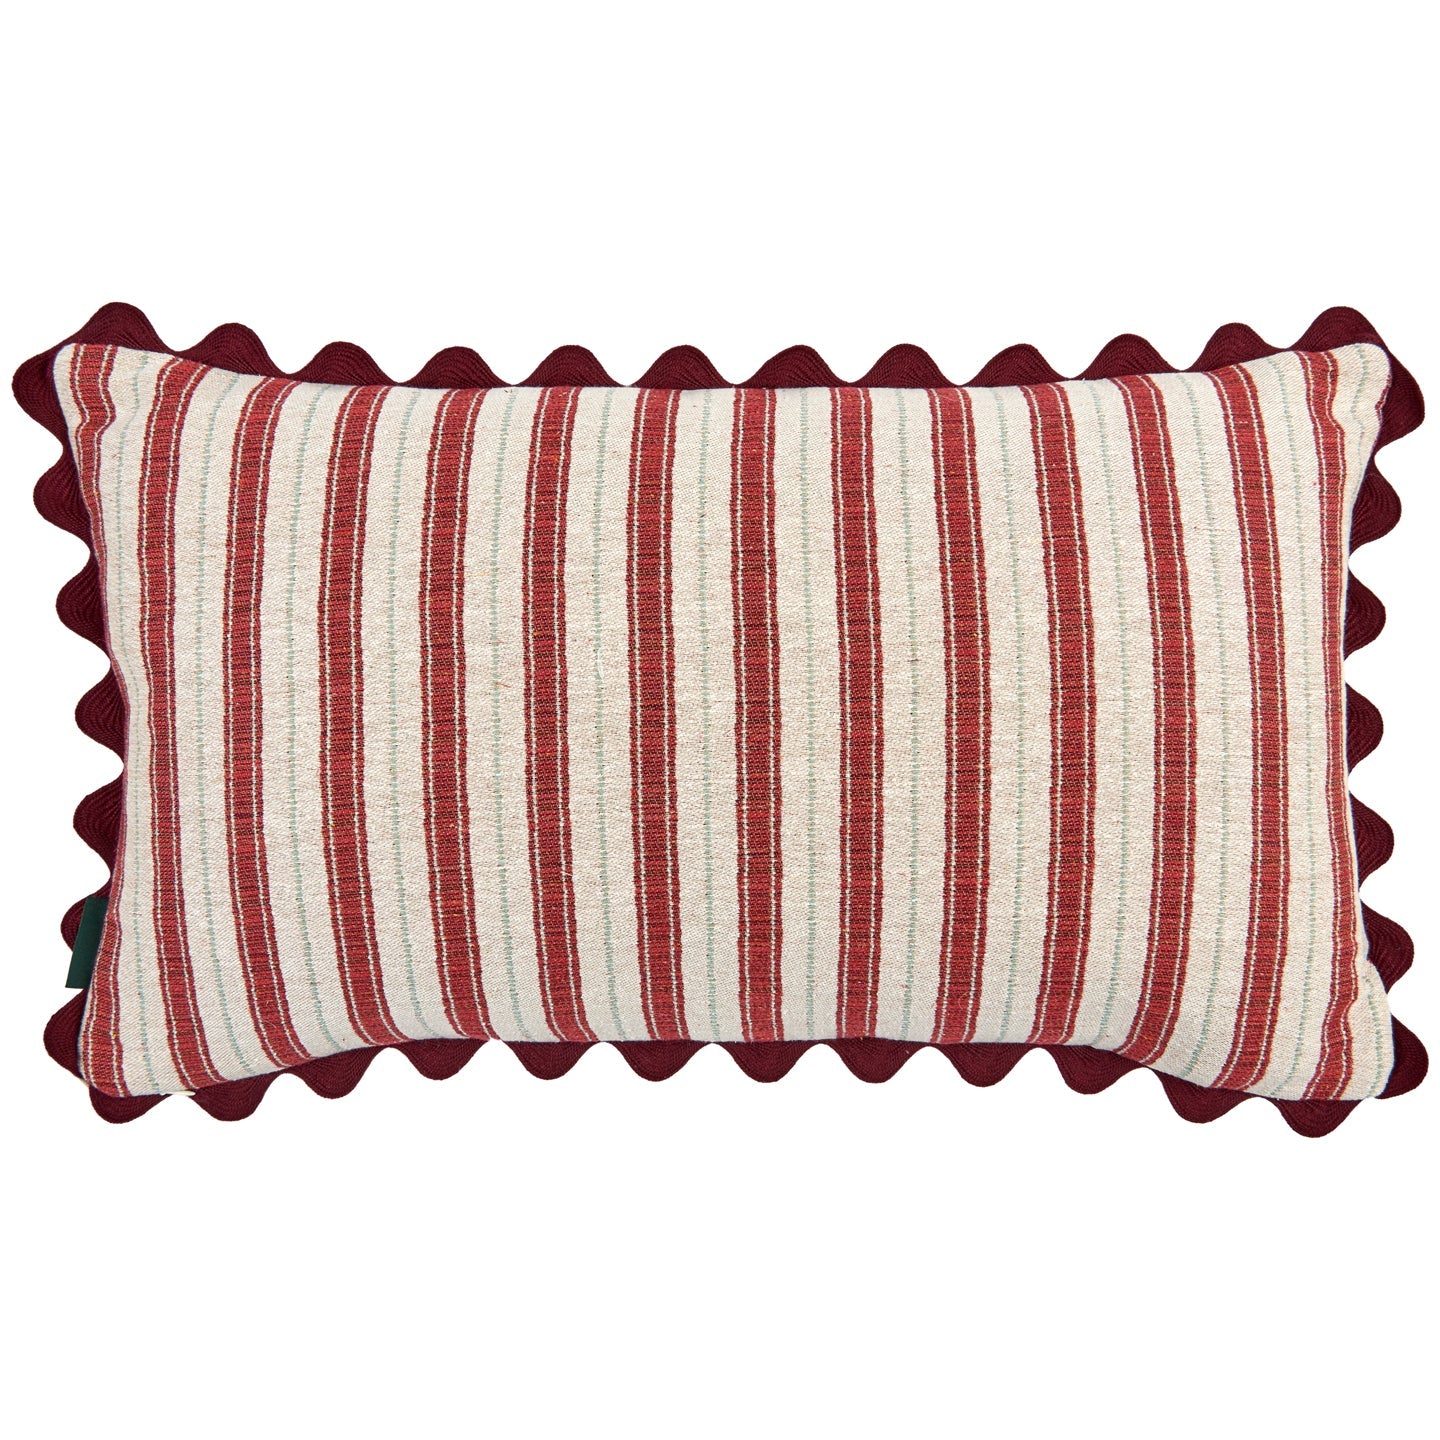 Killi Green and Sketched Stripe Red Green with Burgundy Wavy Trim